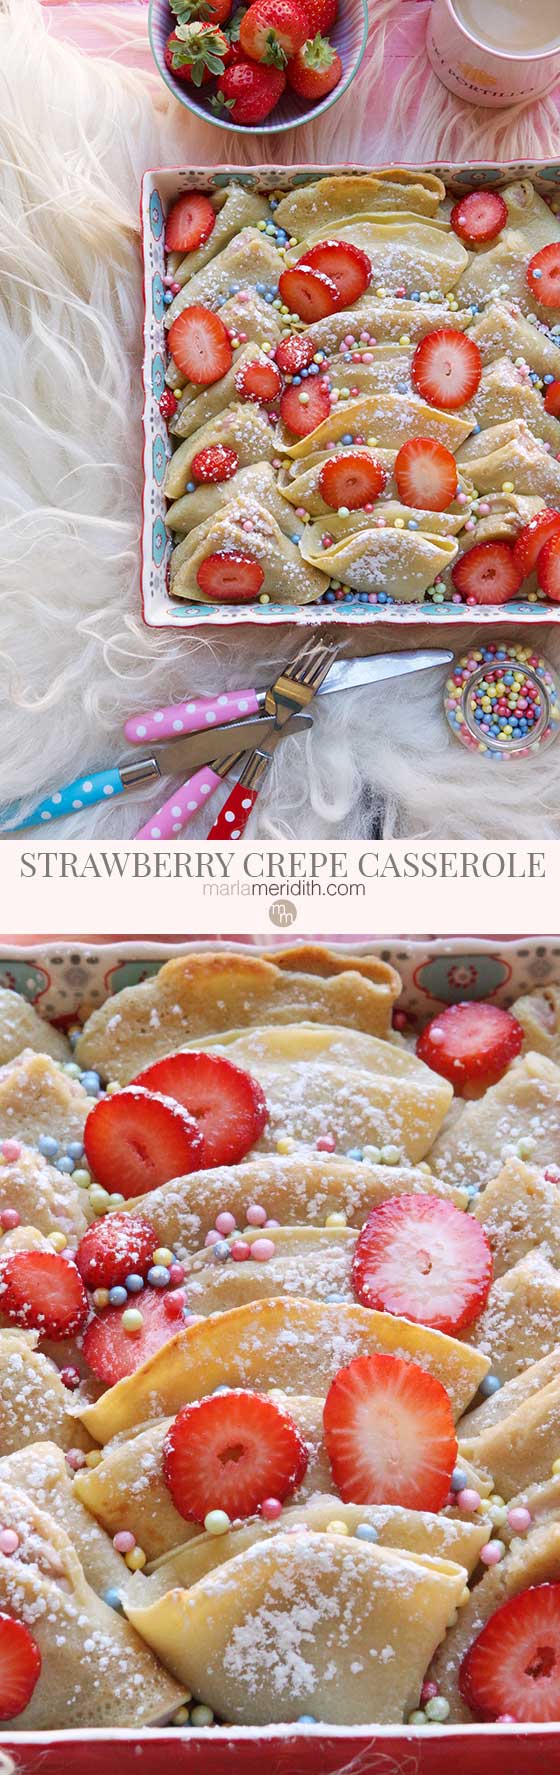 This is quite possibly the BEST breakfast/brunch recipe ever! Show off your cooking skills with this easy Strawberry Cream Cheese Crepe Casserole recipe. MarlaMeridith.com